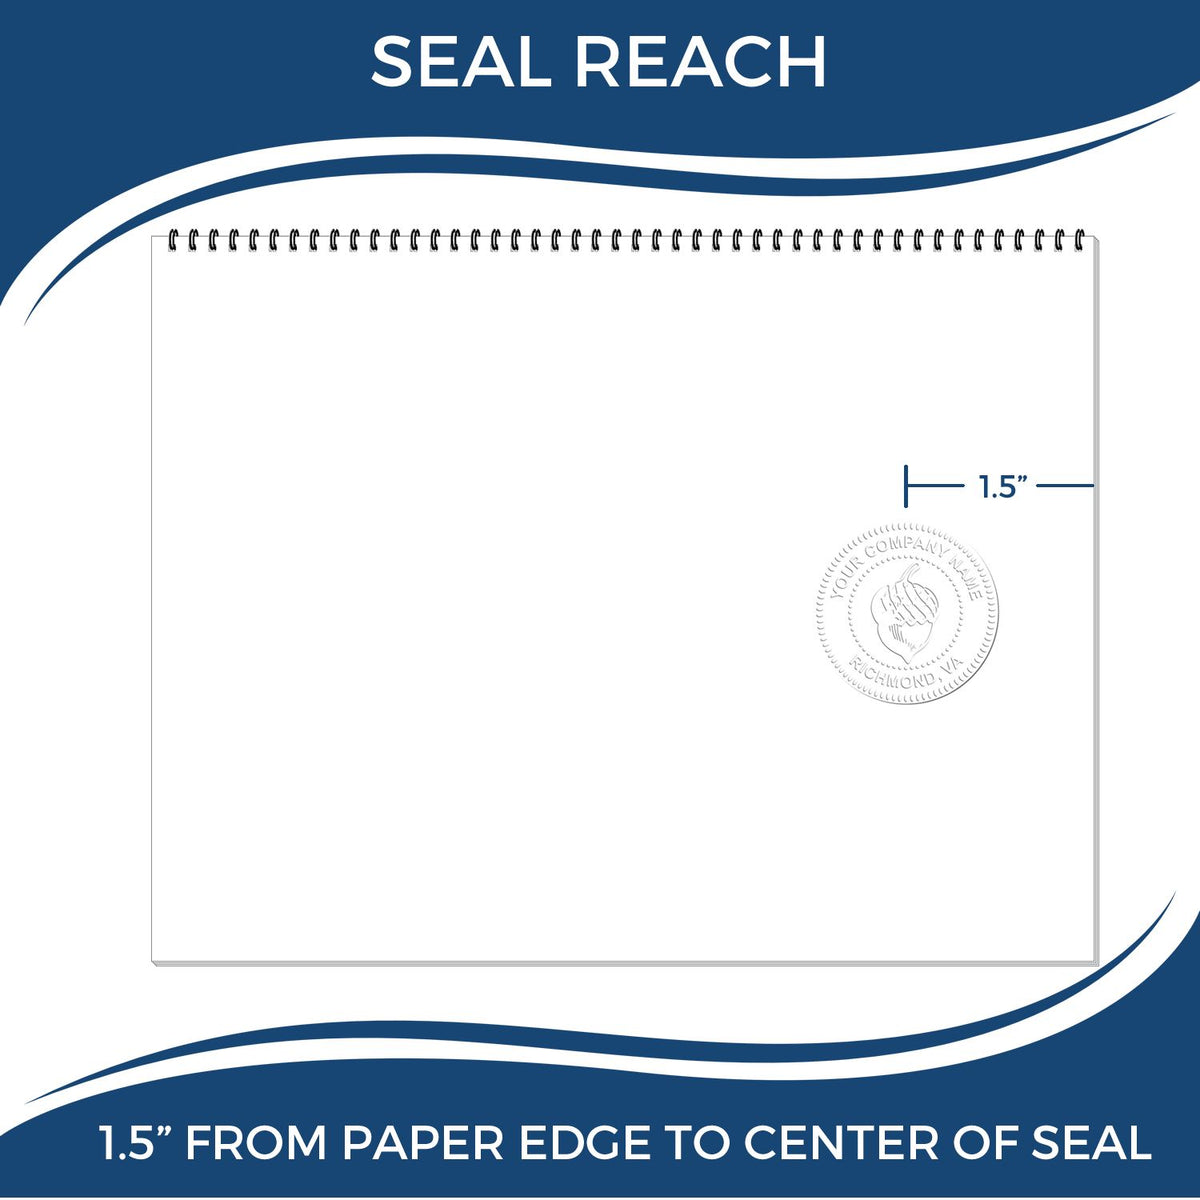 An infographic showing the seal reach which is represented by a ruler and a miniature seal image of the Hybrid Ohio Landscape Architect Seal